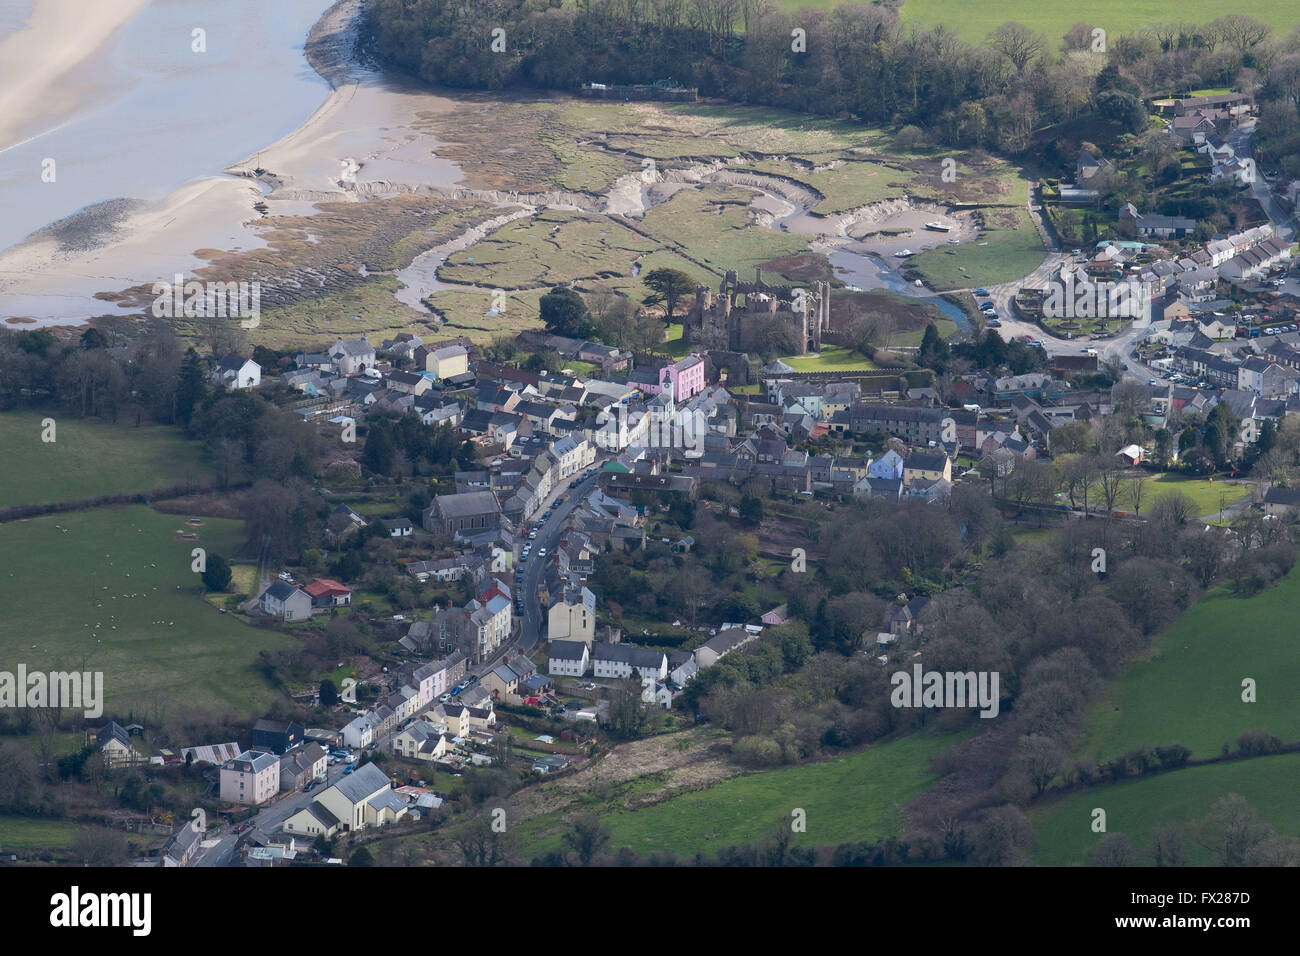 Aerial view of Laugharne, west Wales, on the River Taf estuary. Laugharne was home of poet and writer Dylan Thomas. Stock Photo